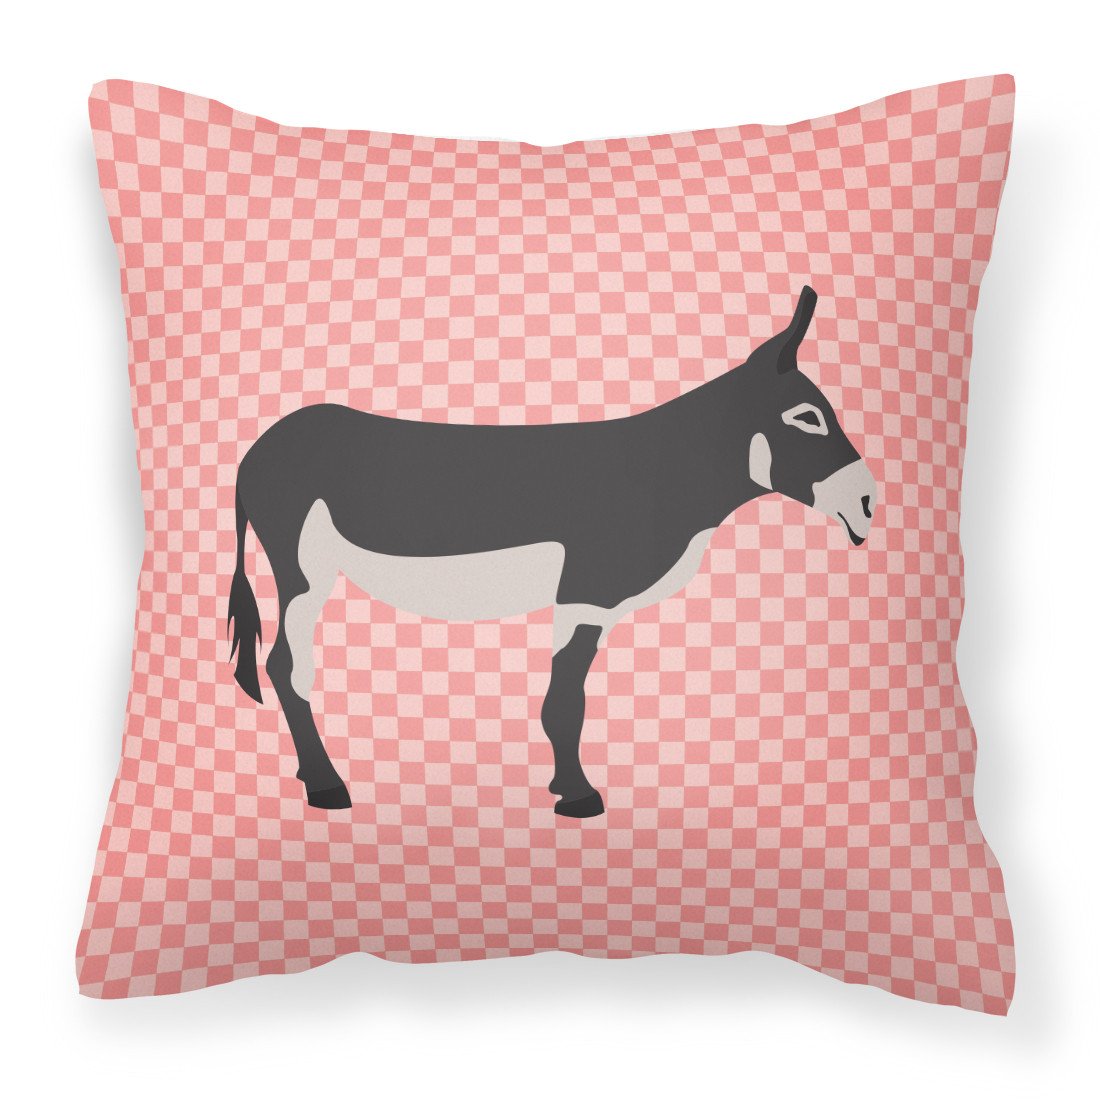 American Mammoth Jack Donkey Pink Check Fabric Decorative Pillow BB7844PW1818 by Caroline's Treasures